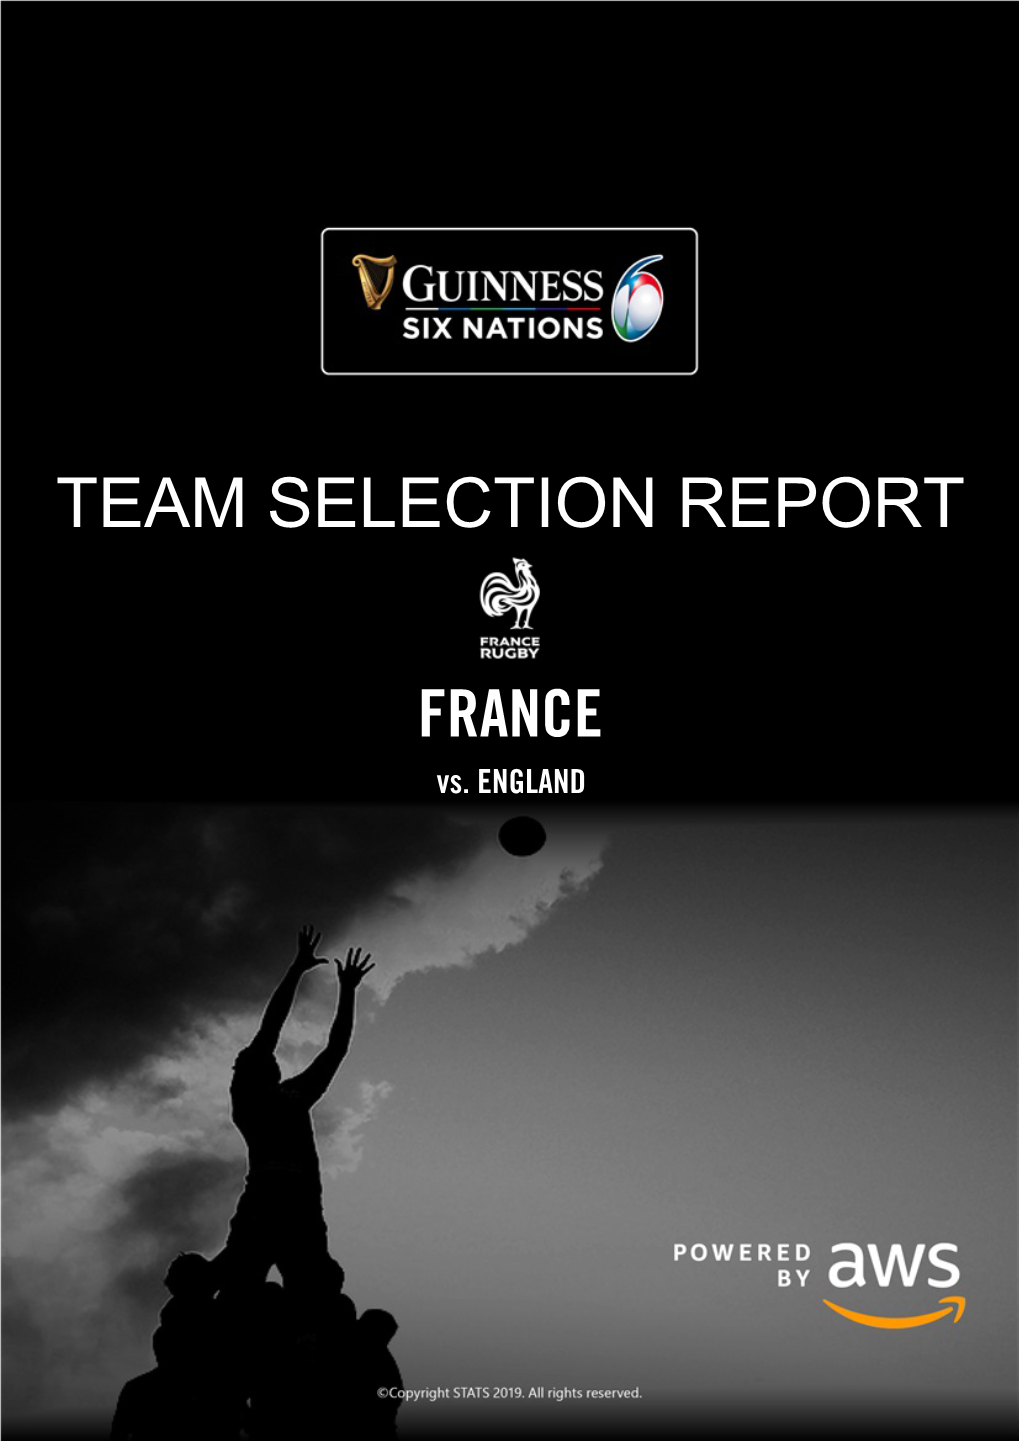 France TEAM SELECTION REPORT